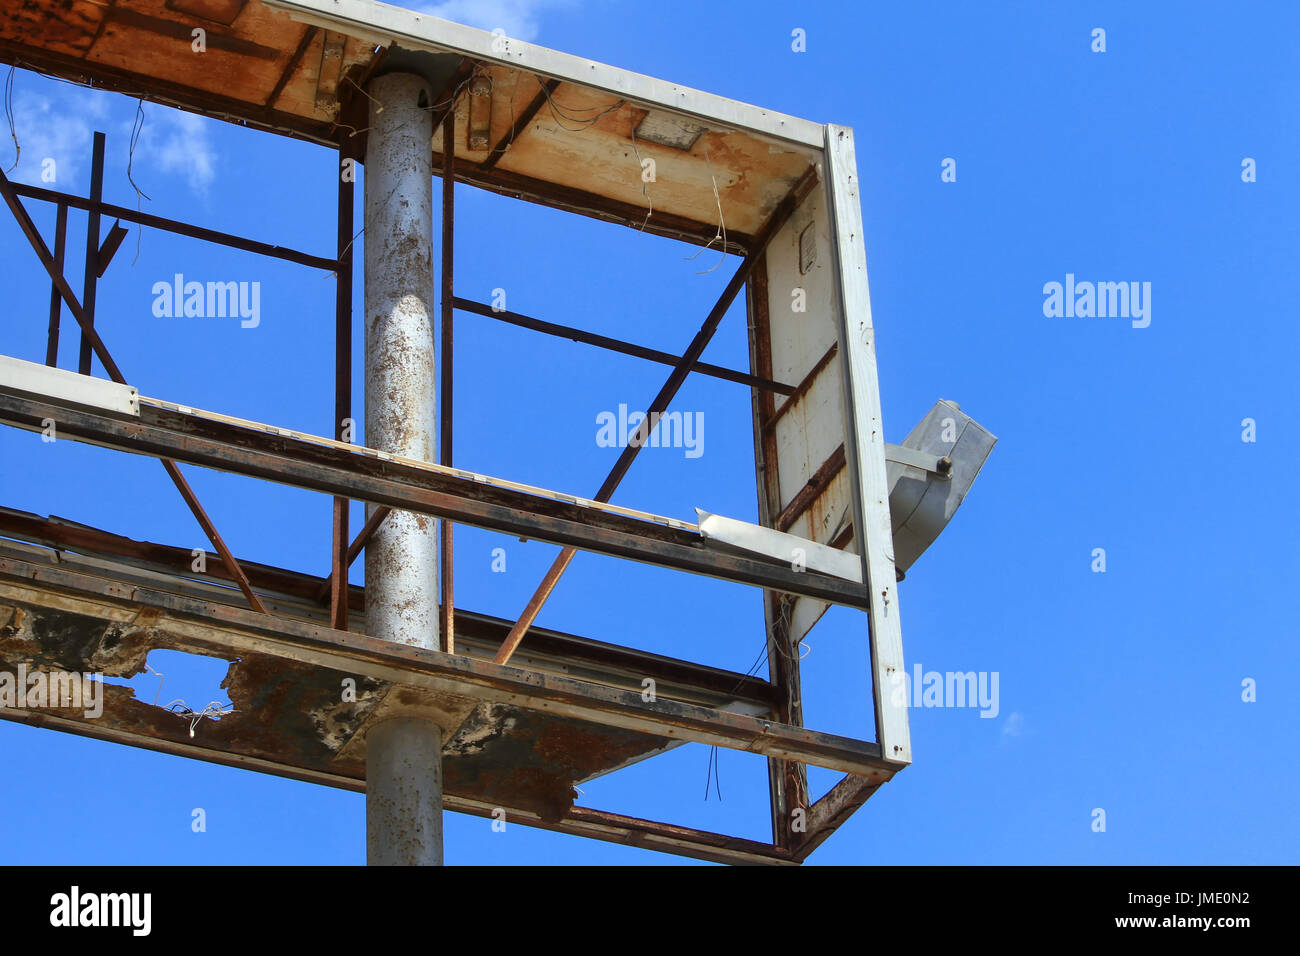 An empty rusted metal sign frame against a blue sky. Stock Photo